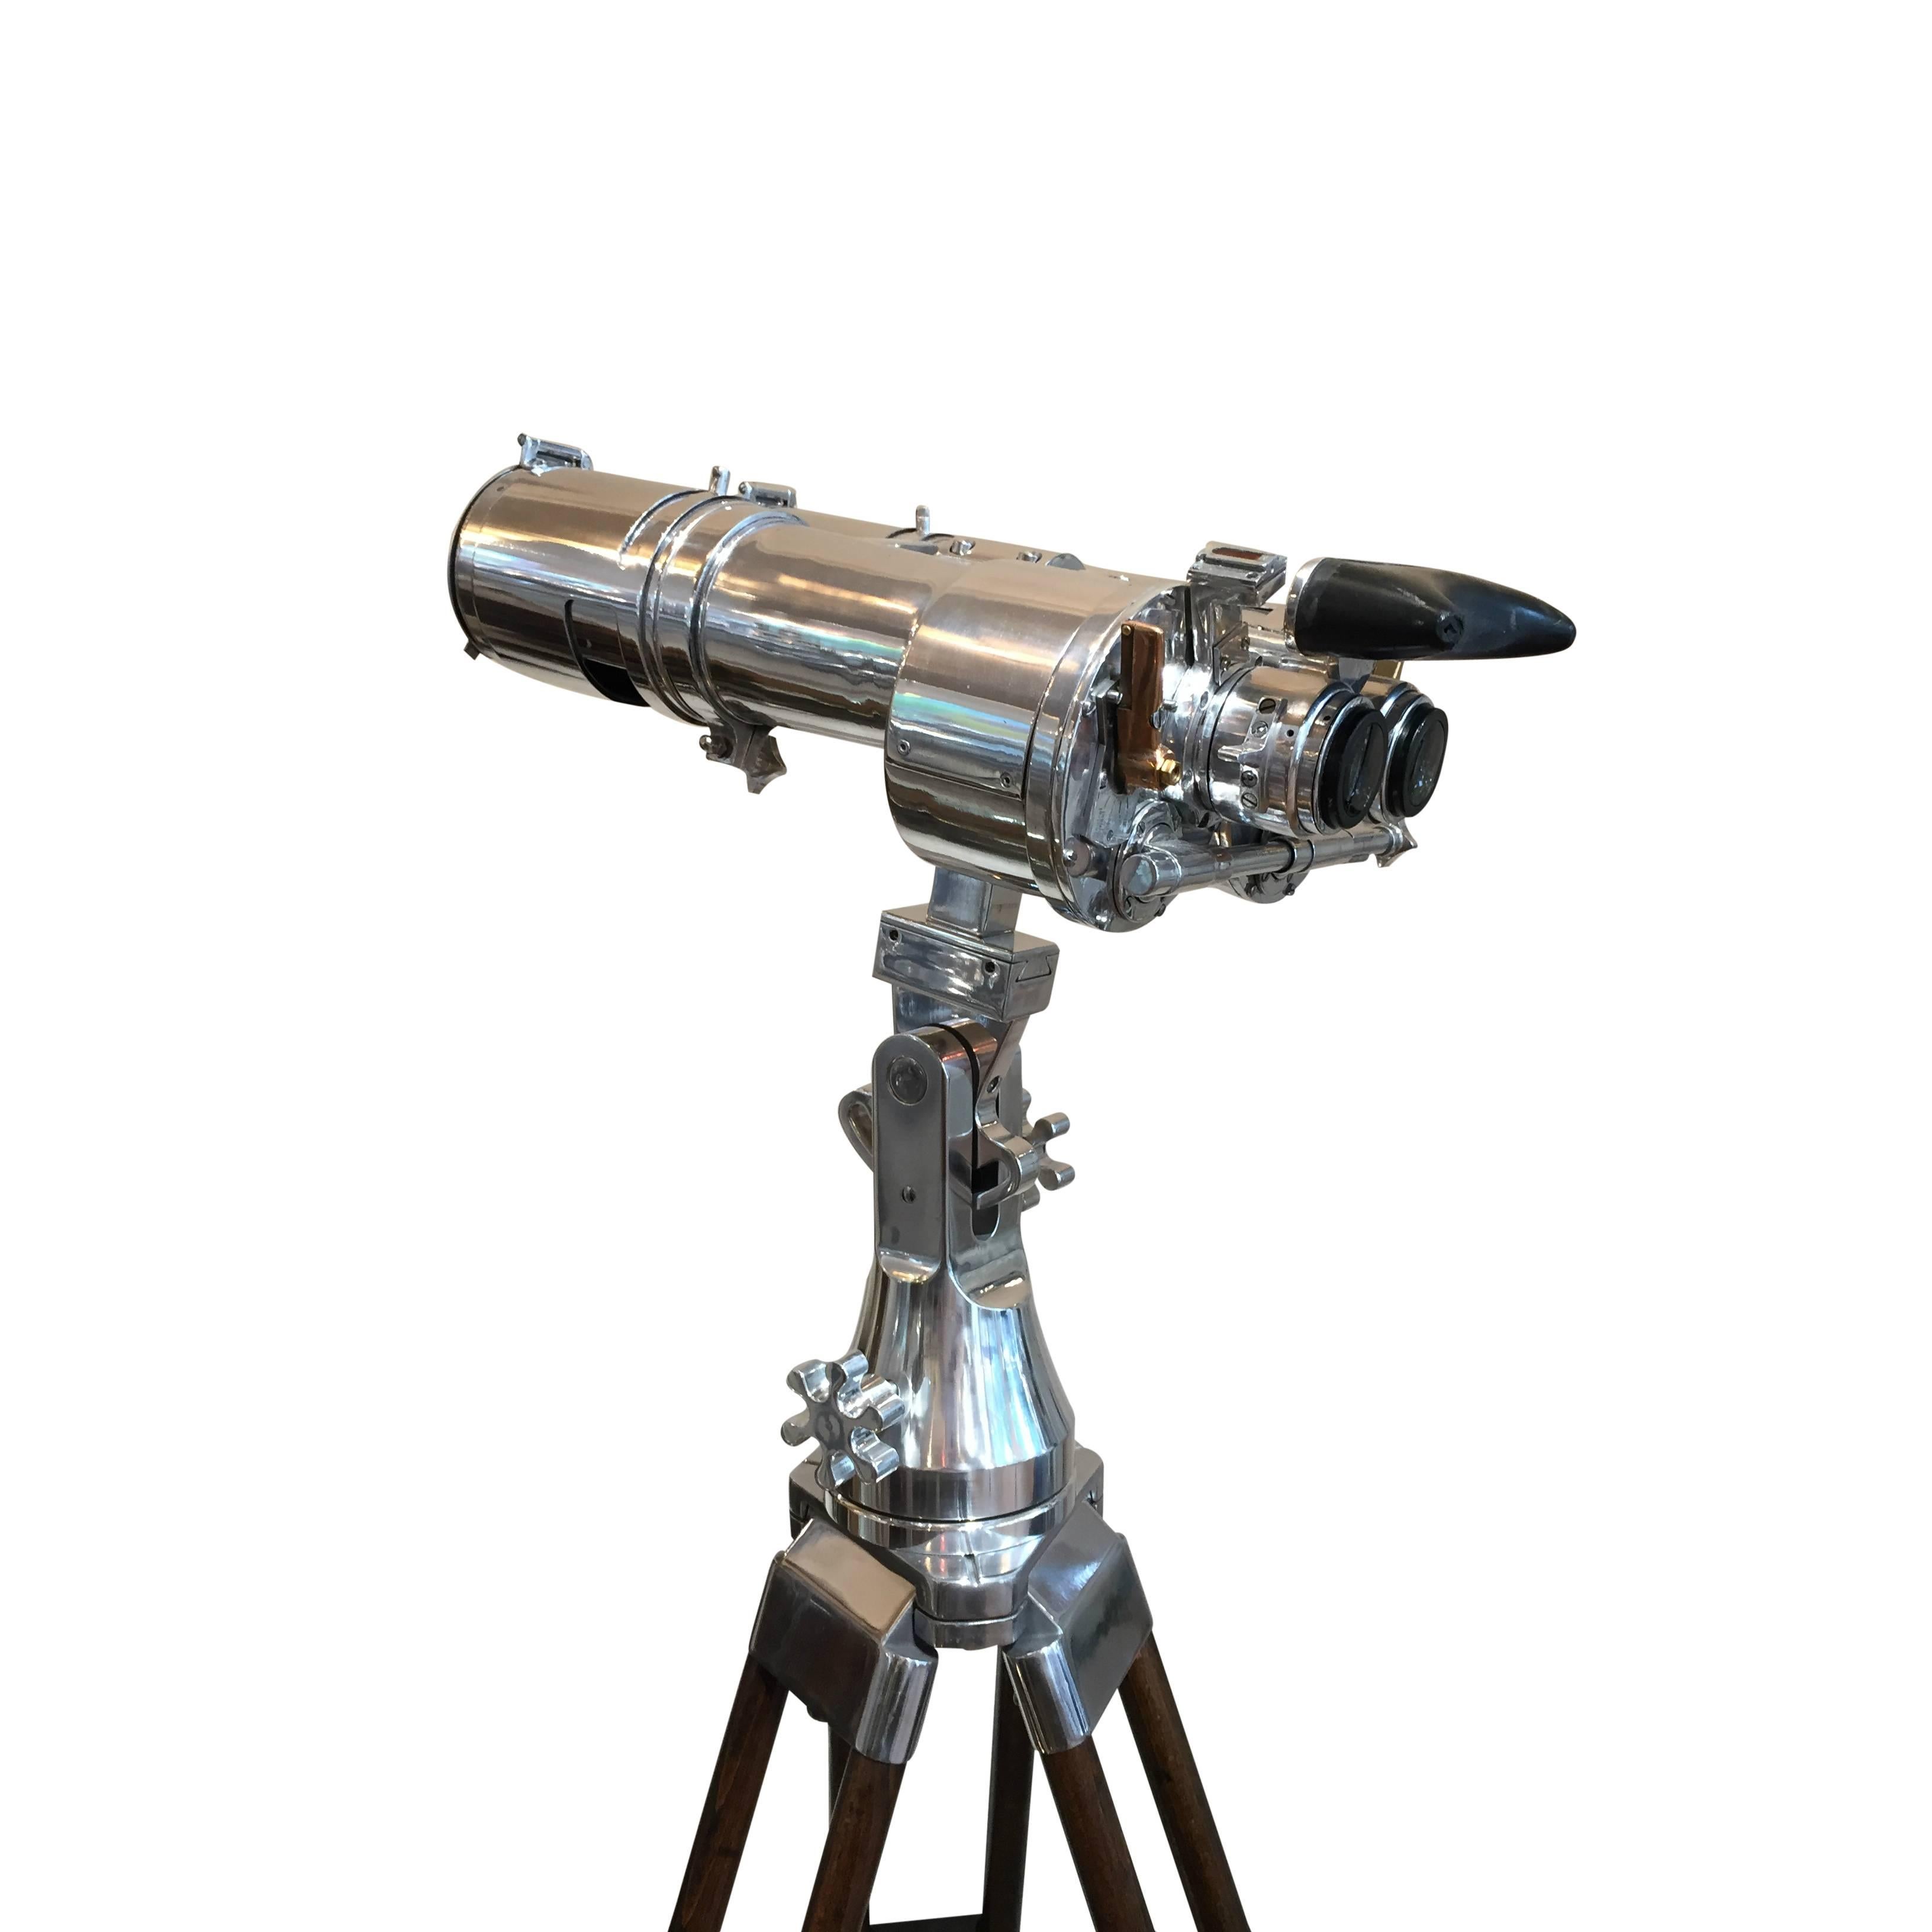 These rare and interesting Carl Zeiss Naval 8 x 60 binoculars are a true collector's piece, circa 1950. These big-eye binoculars provide the viewer with a clear and crisp picture that can only be achieved by the preeminent lenses of Zeiss. 

The